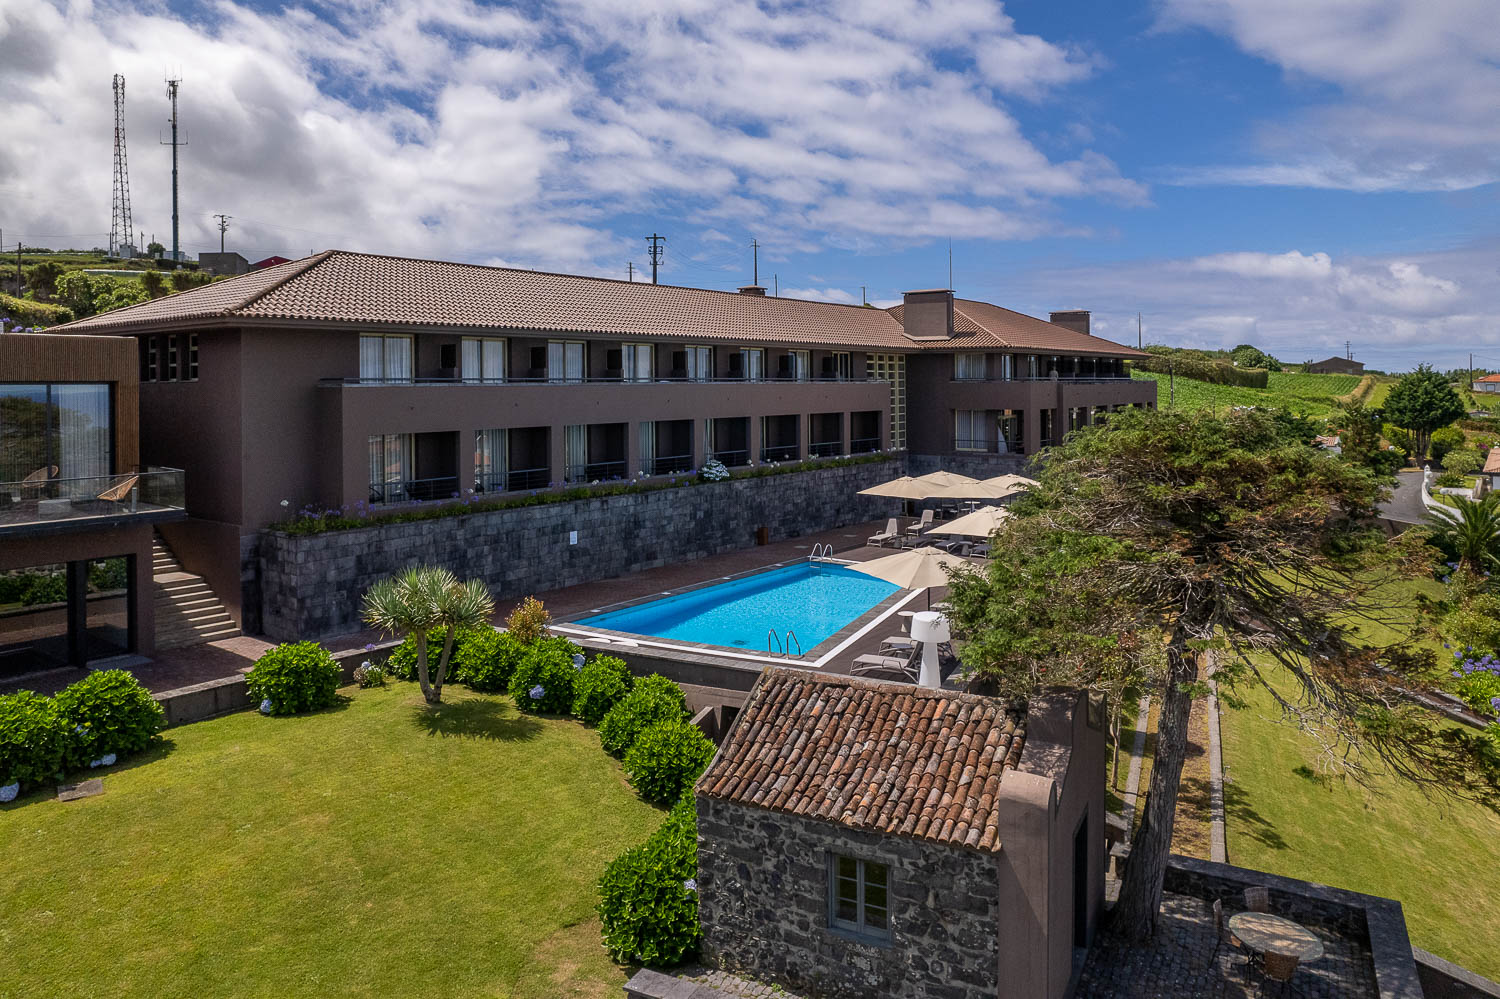 The Lince Nordeste - Hotels & Resorts